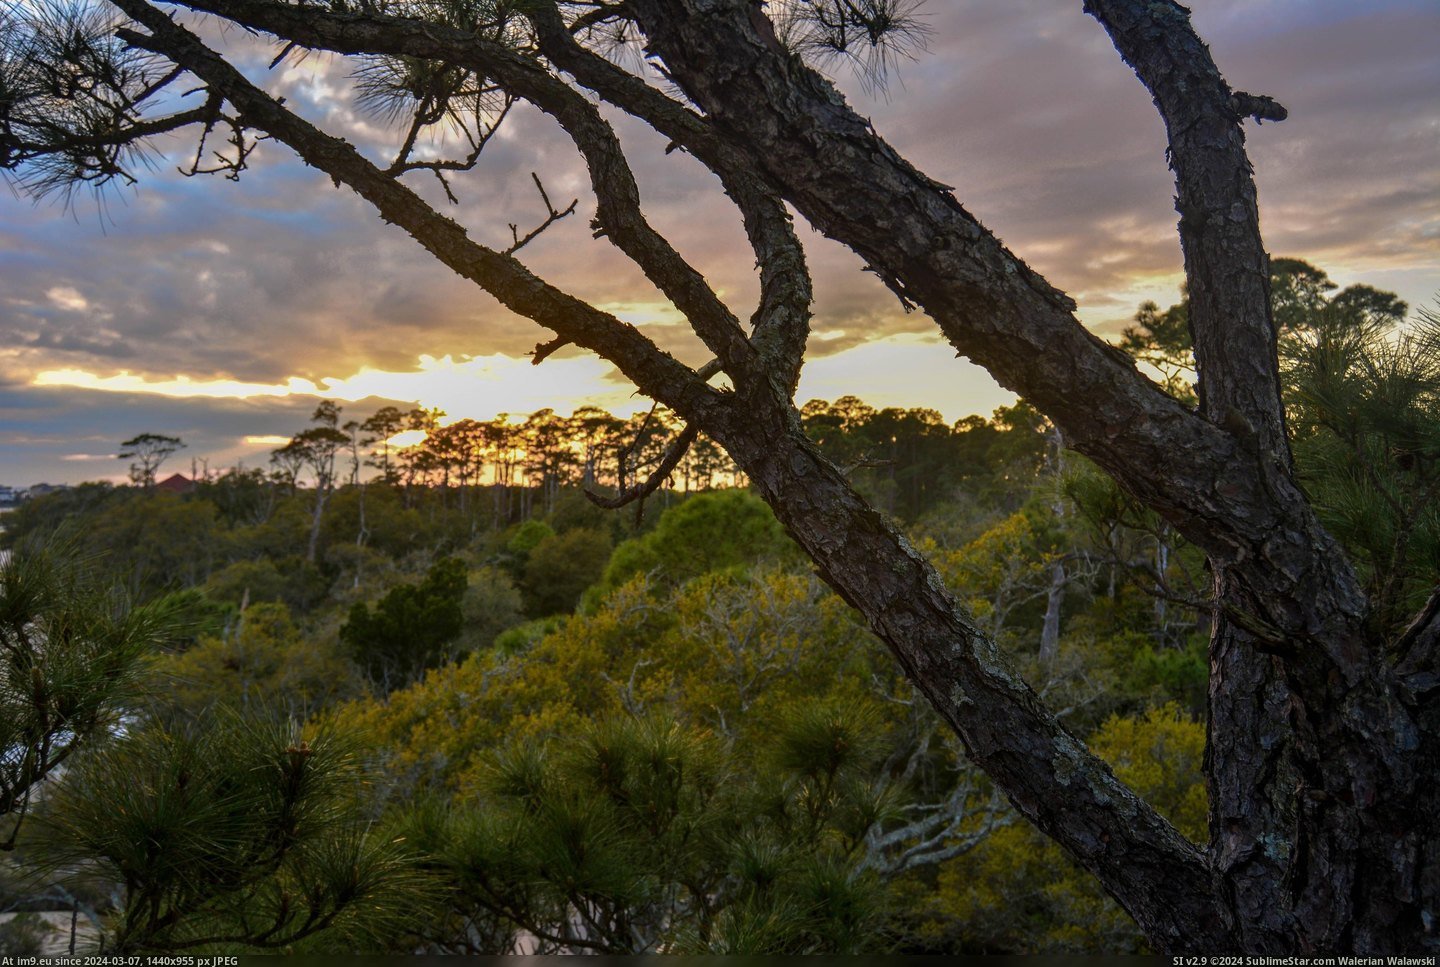 #Feet #Sunset #6000x4000 #Overlooking #Pensacola #Trees #Florida [Earthporn] Around 30 feet up in the trees, overlooking the sunset in Pensacola, Florida. [6000x4000] Pic. (Изображение из альбом My r/EARTHPORN favs))